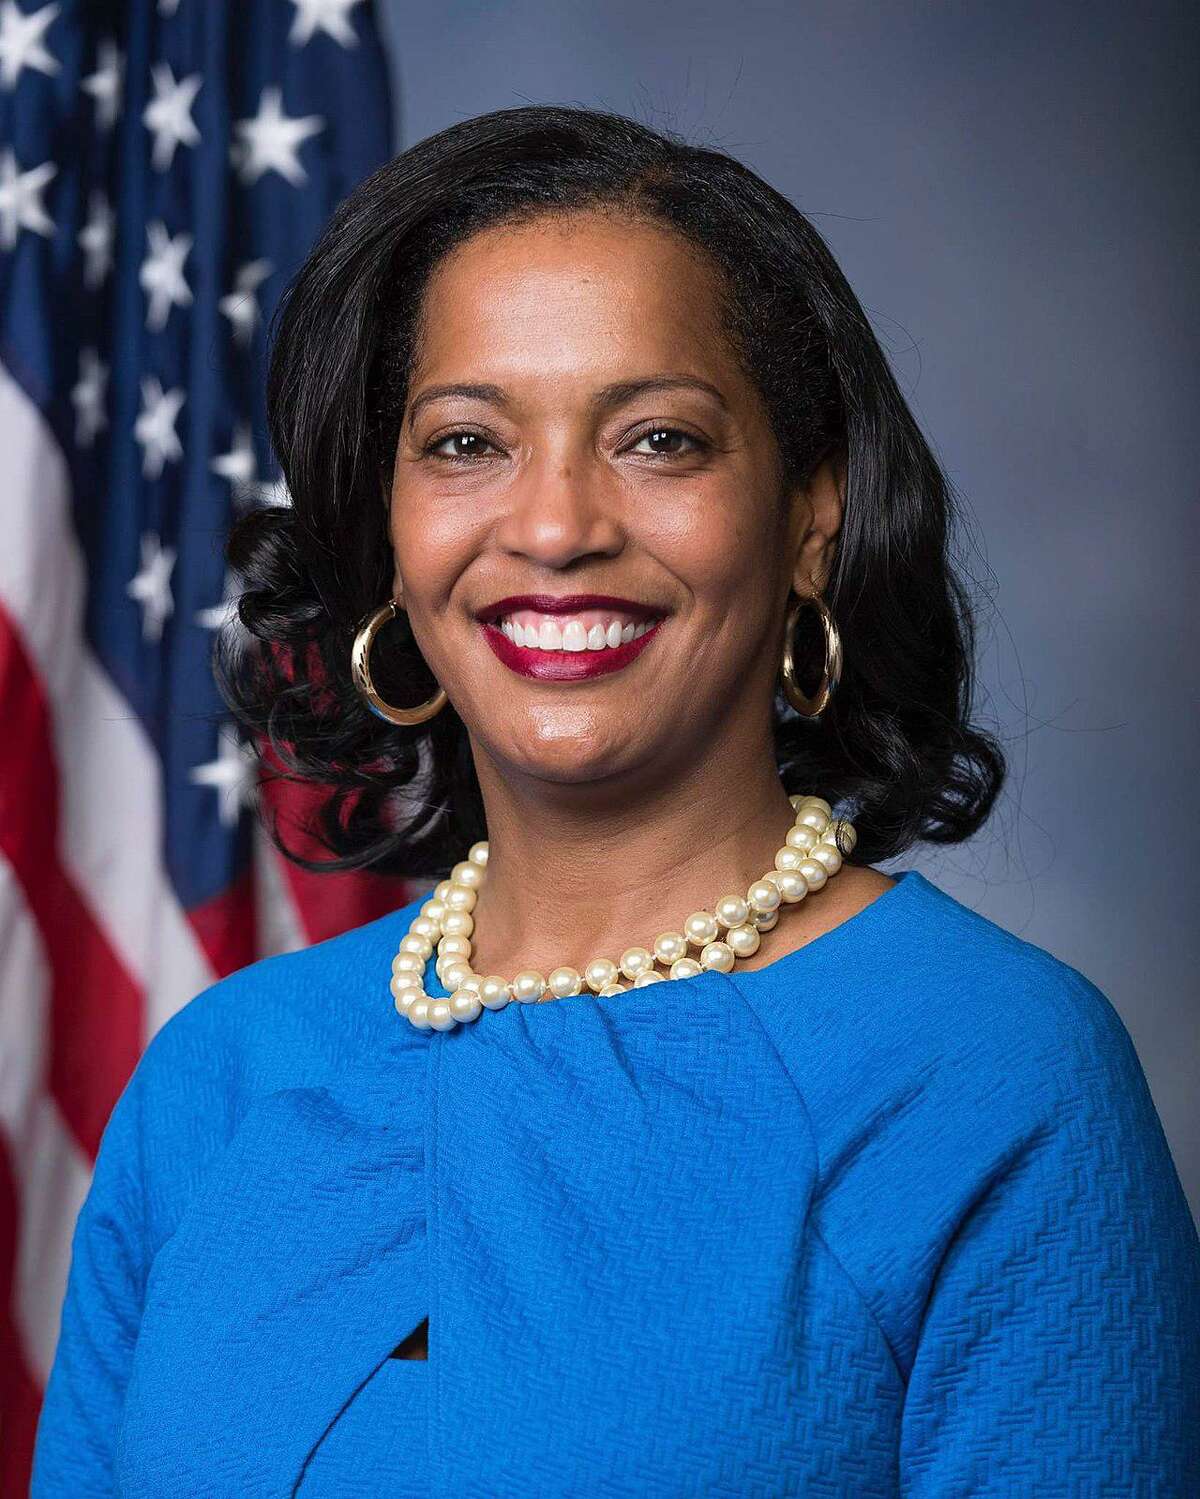 U.S. Rep. Jahana Hayes. The Hearst Connecticut Media editorial board endorsed her for election in 2018.